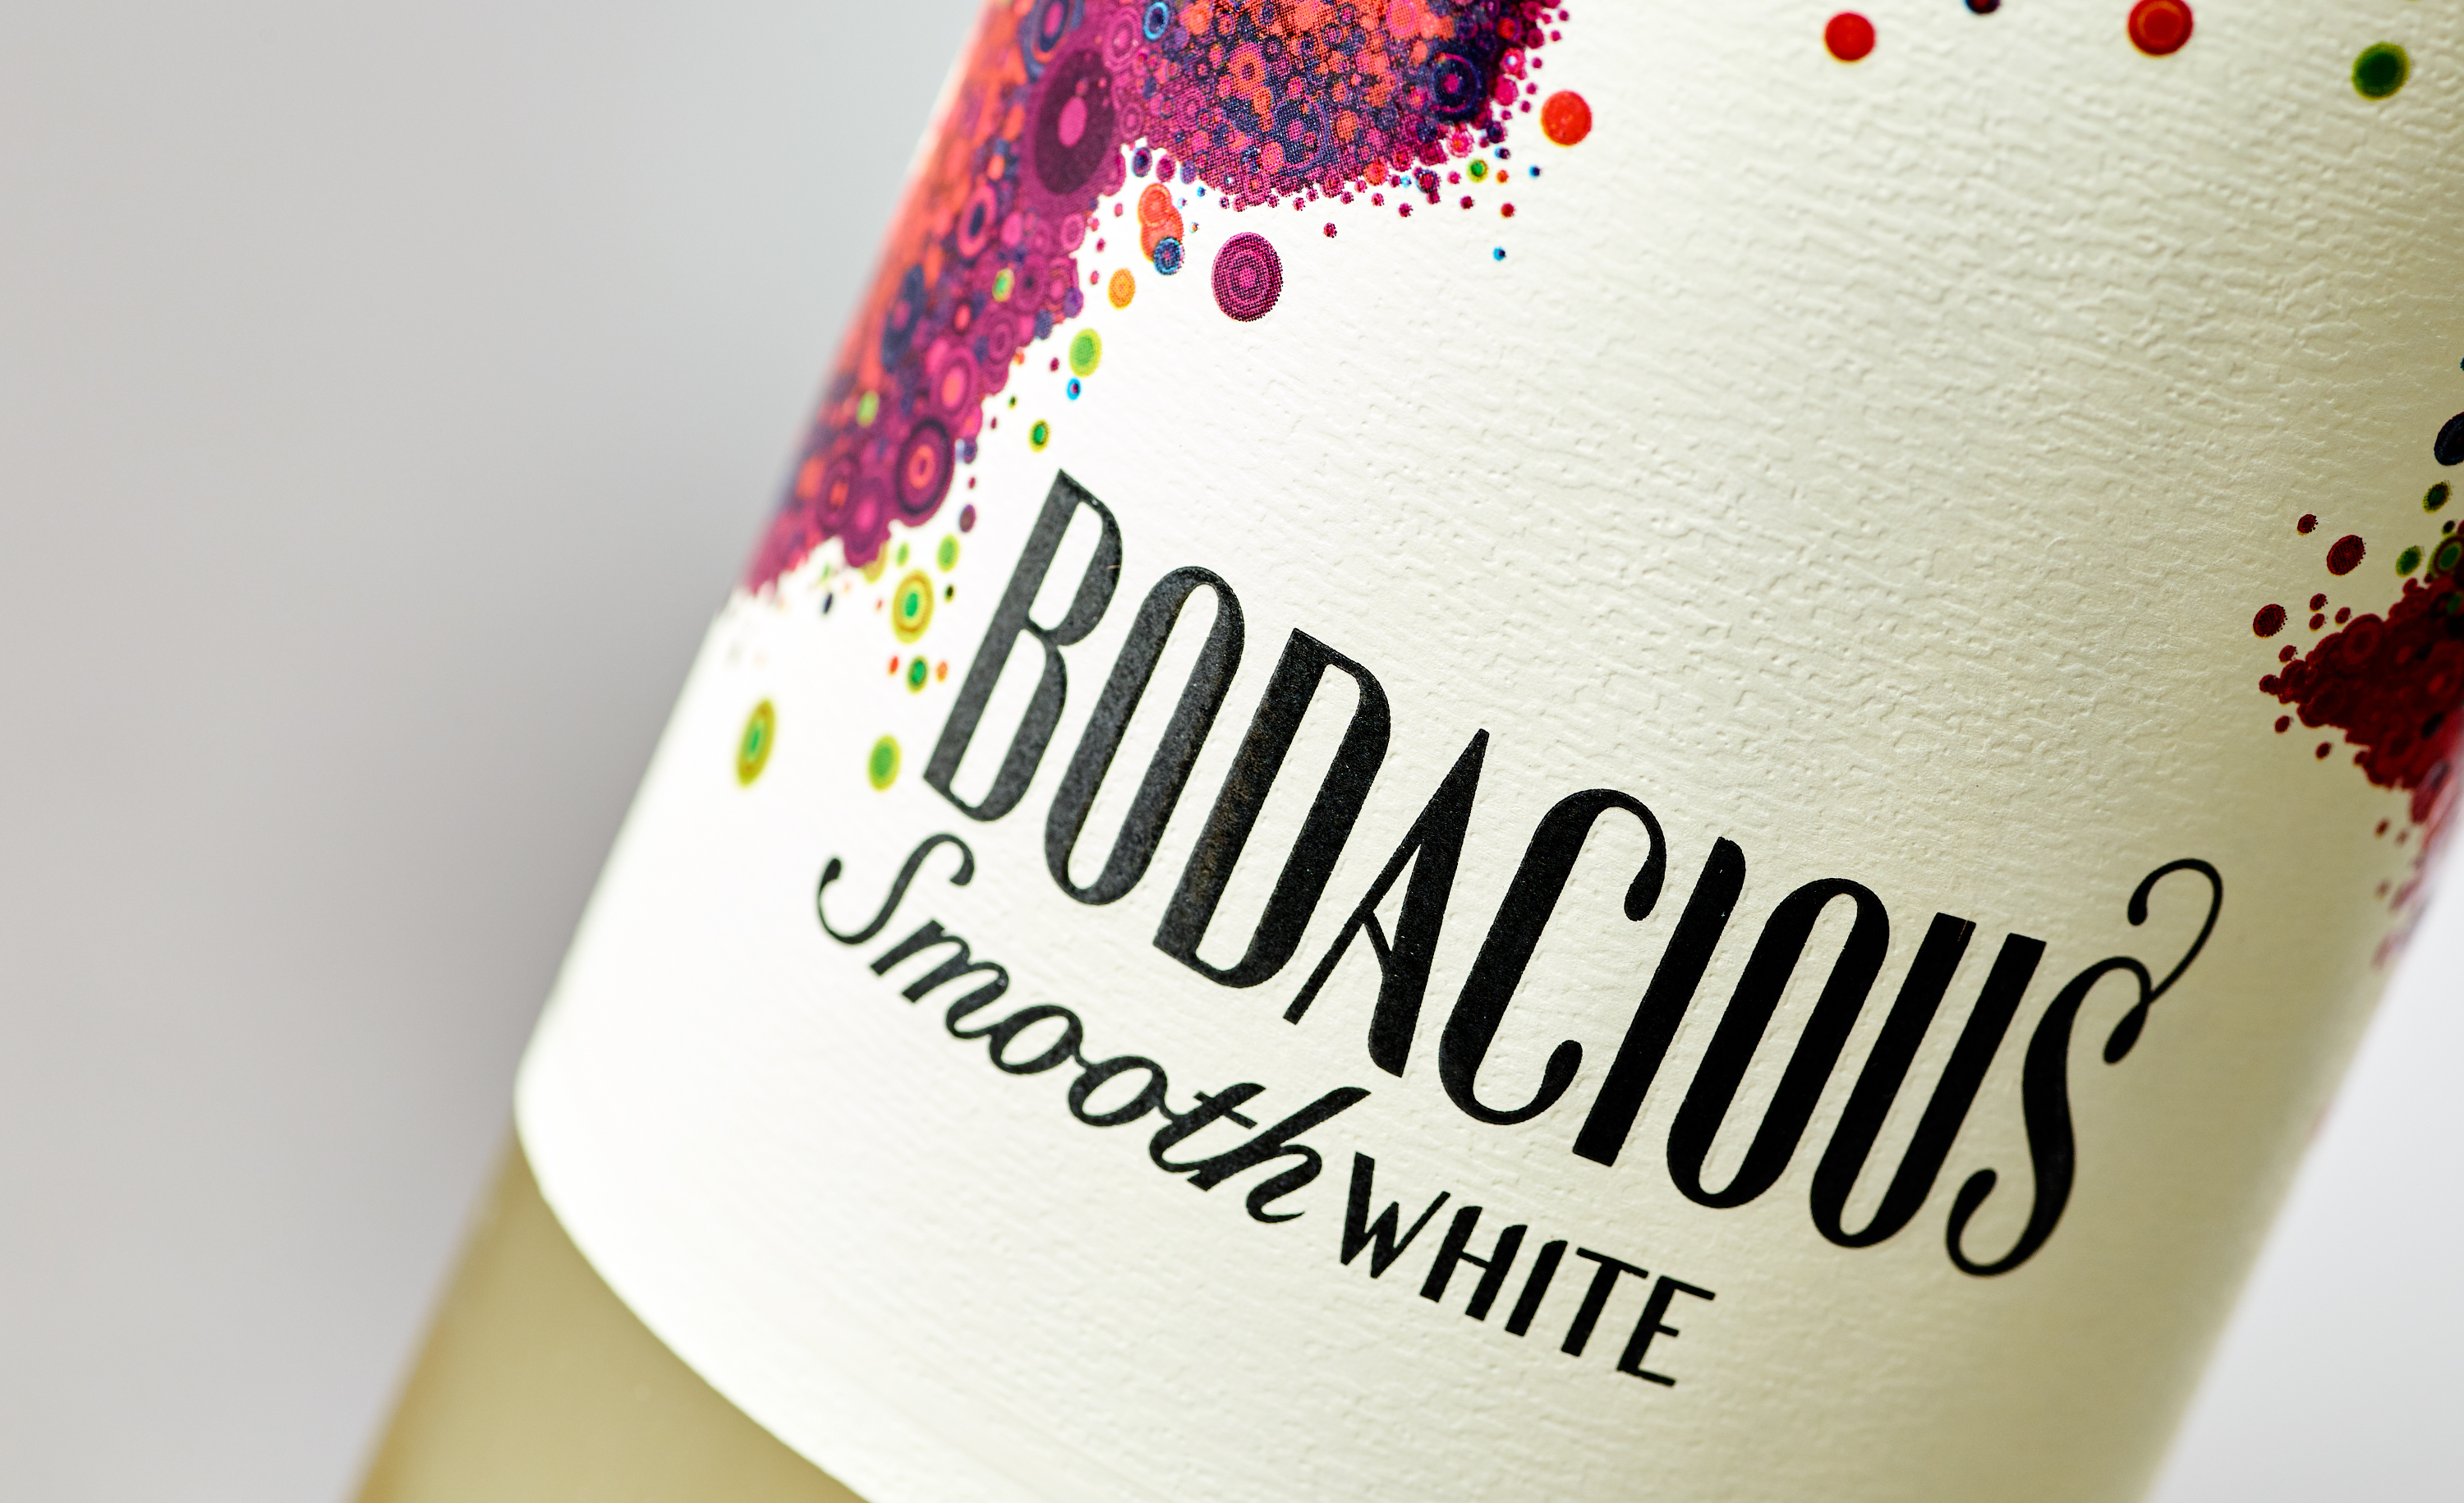 Bodacious Wines Label Design Smooth White | Dossier Creative | Boldly Filling the new Product Pipeline